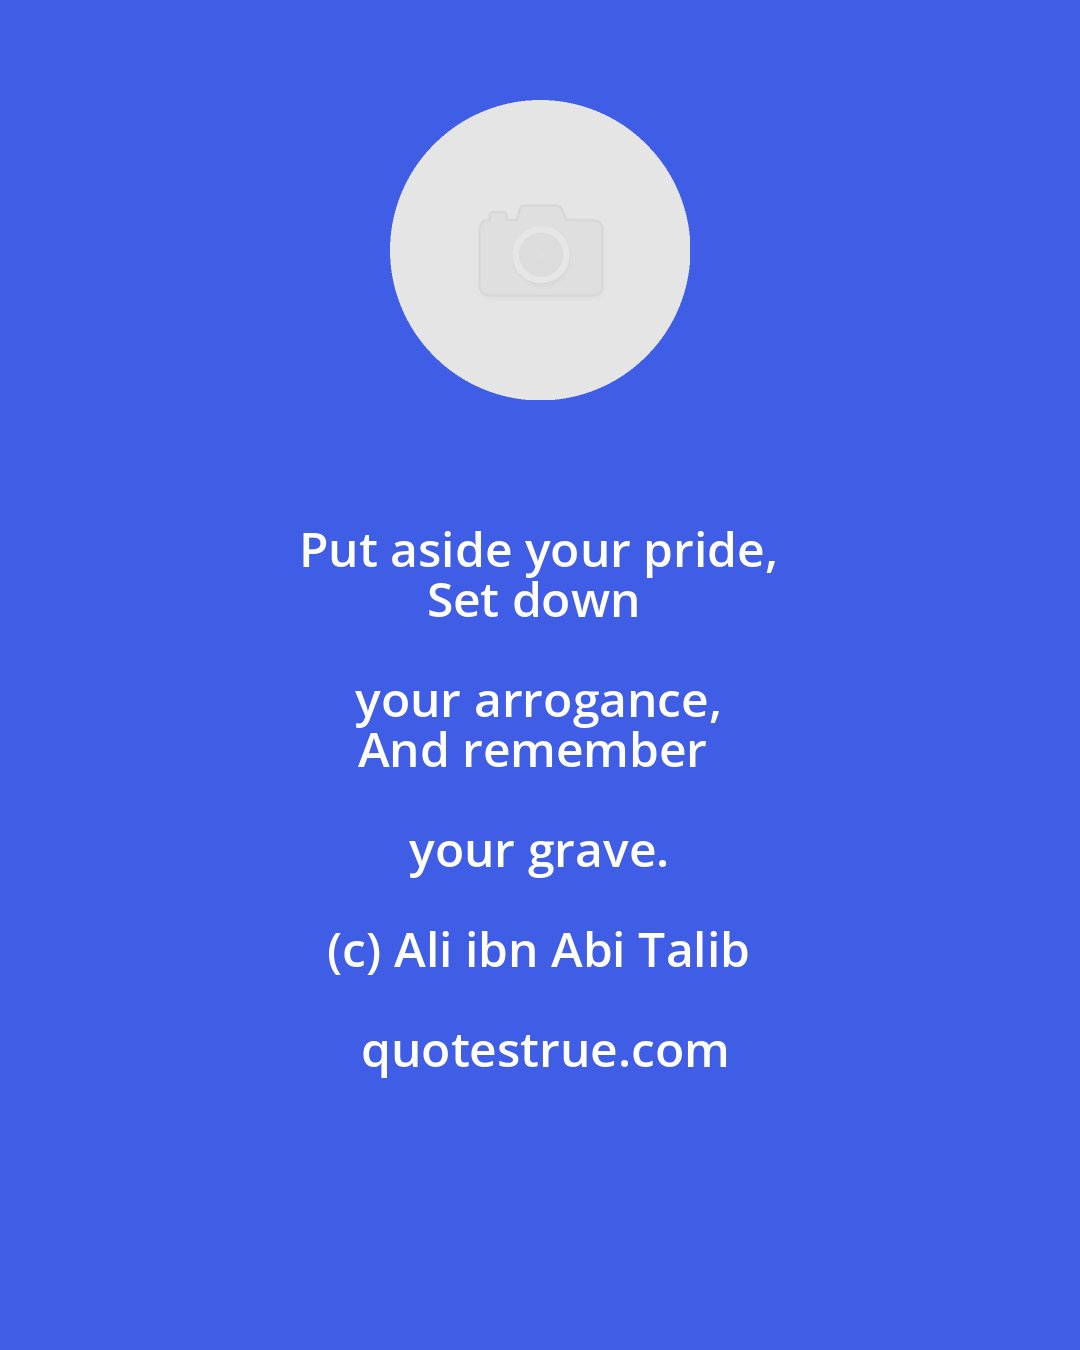 Ali ibn Abi Talib: Put aside your pride, 
Set down your arrogance, 
And remember your grave.